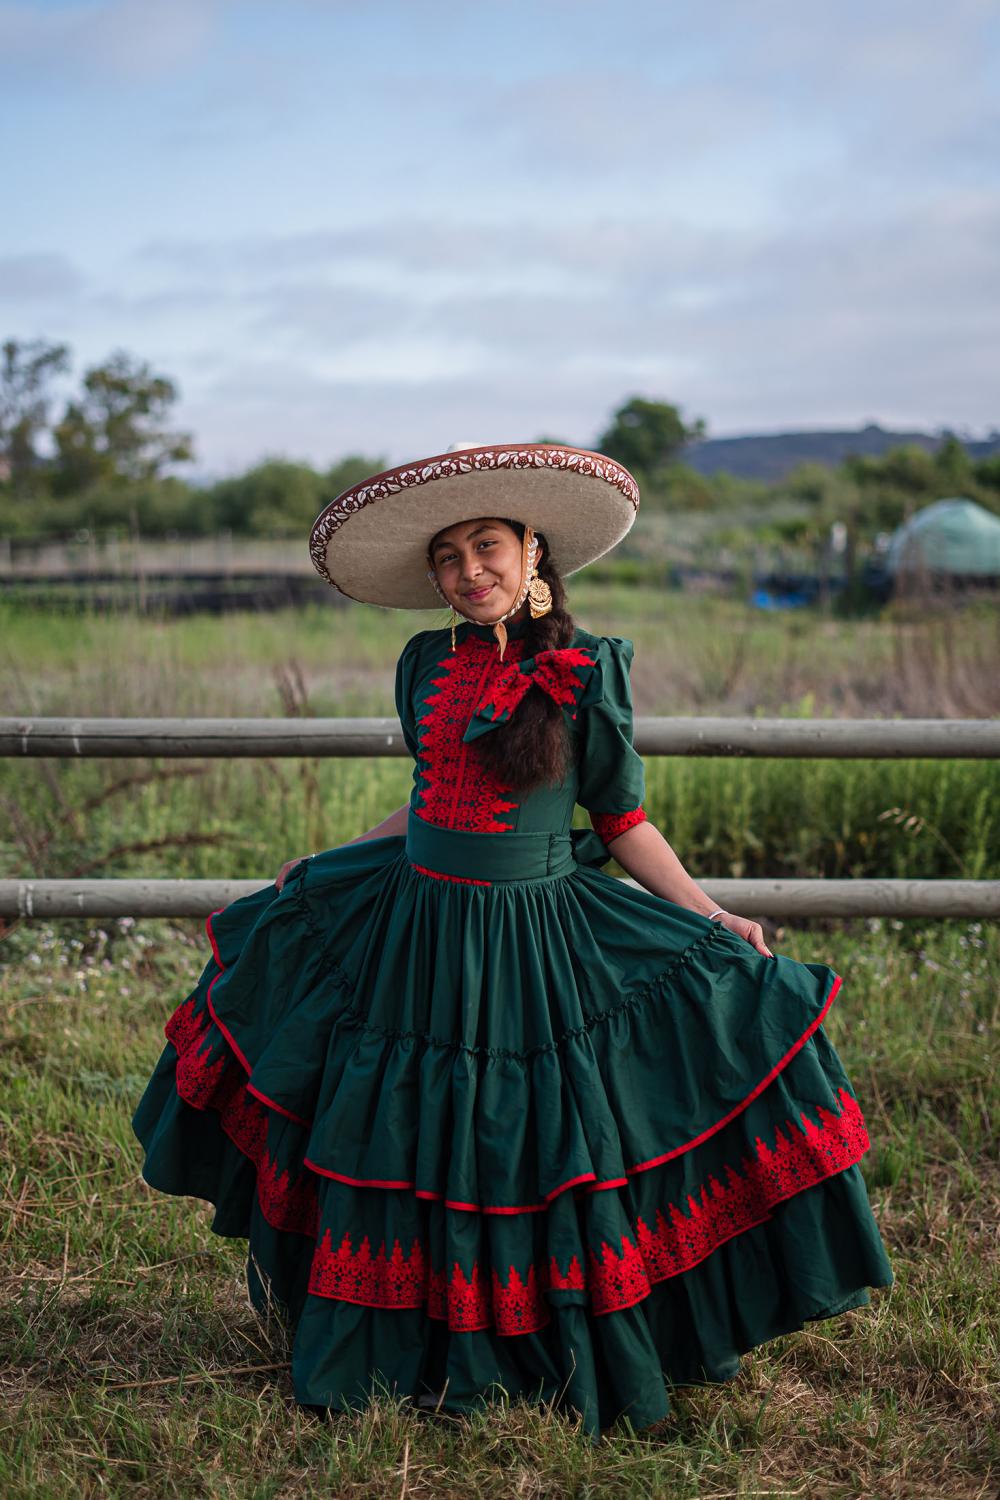 San Diego’s Charros Preserve Mexico’s Cowboy Past - Karen Castillo, 13 years old poses for a photo near the...